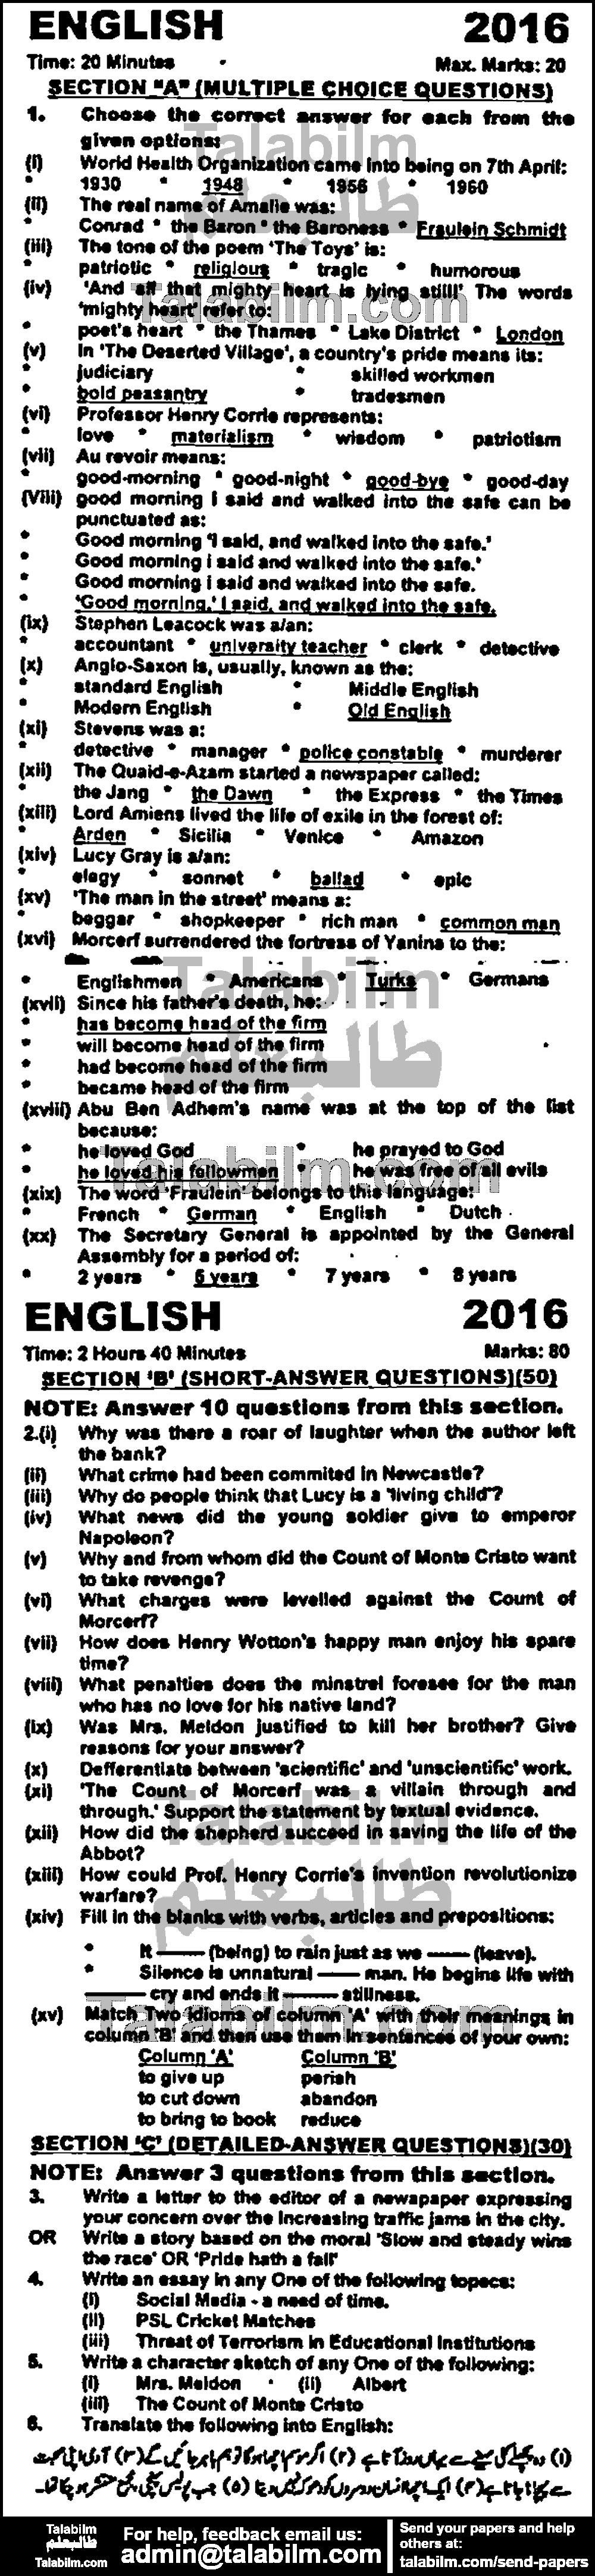 English 0 past paper for Group-I 2016